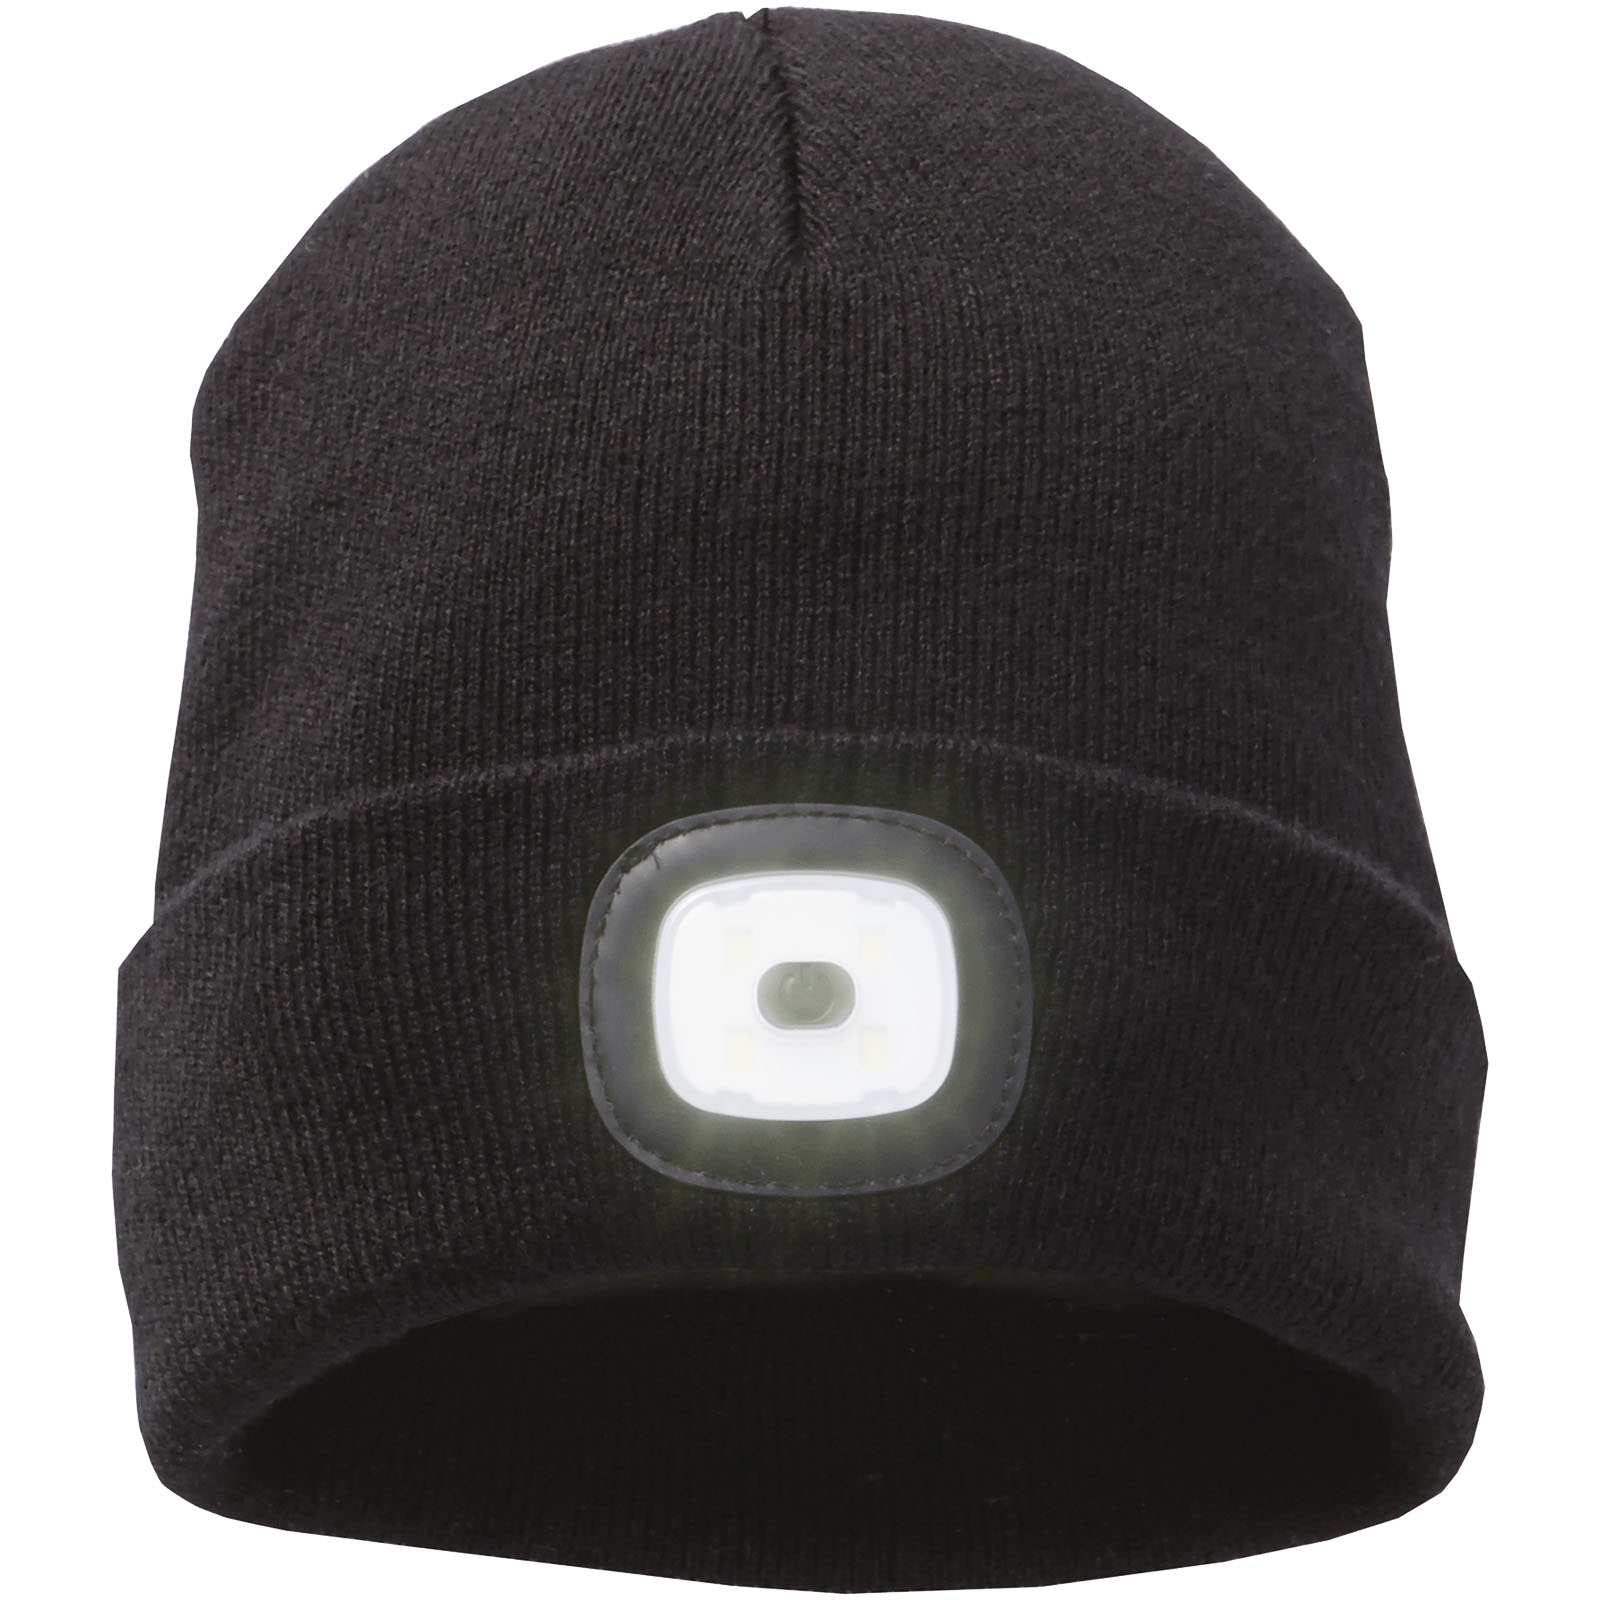 Advertising Beanies - Mighty LED knit beanie